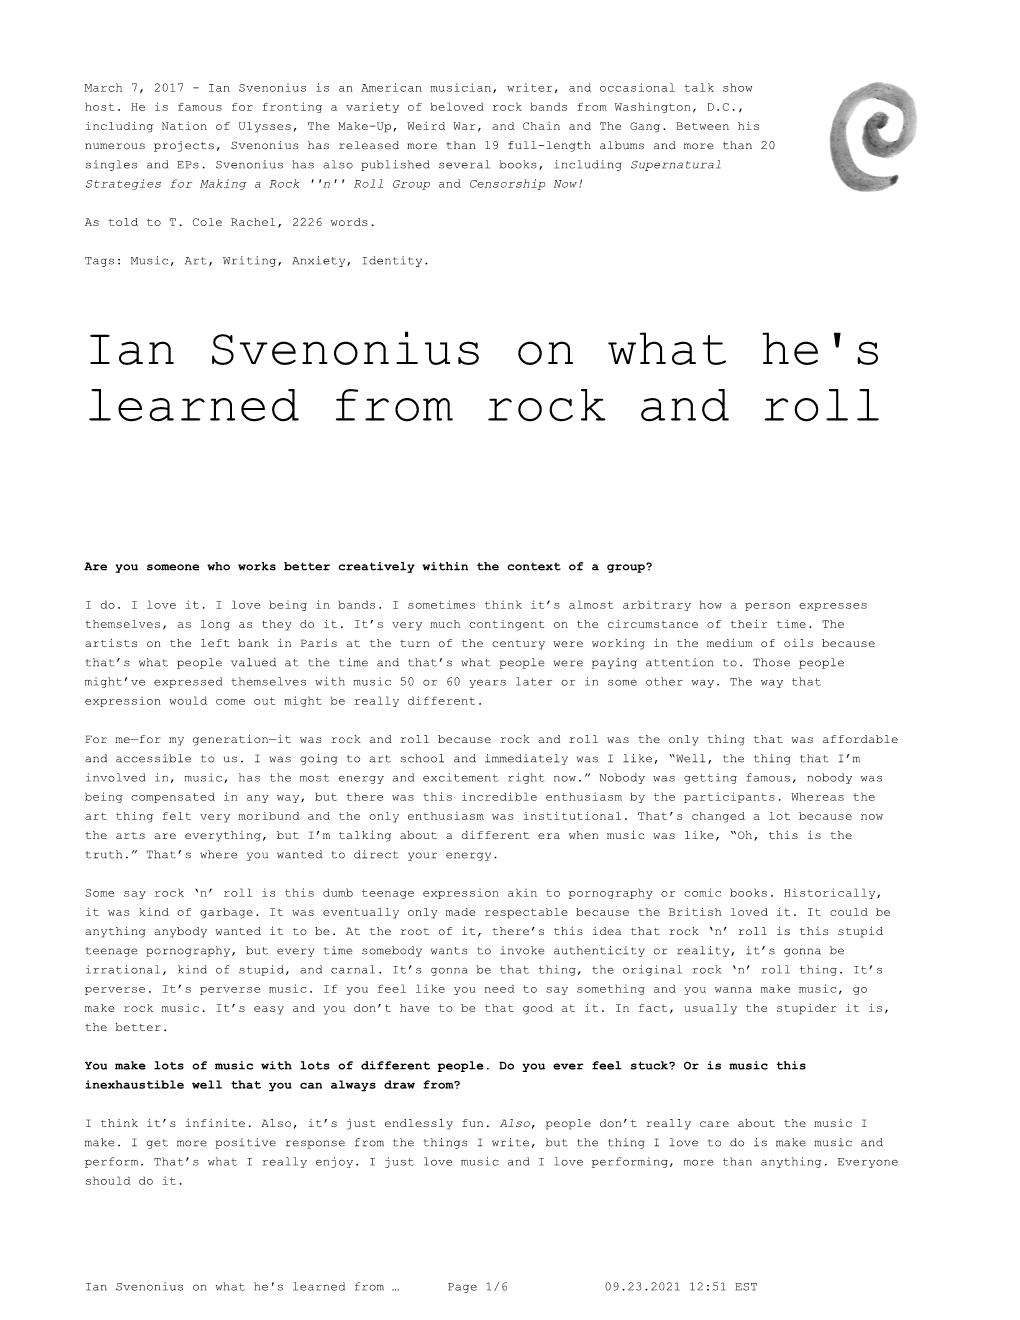 Ian Svenonius on What He's Learned from Rock and Roll